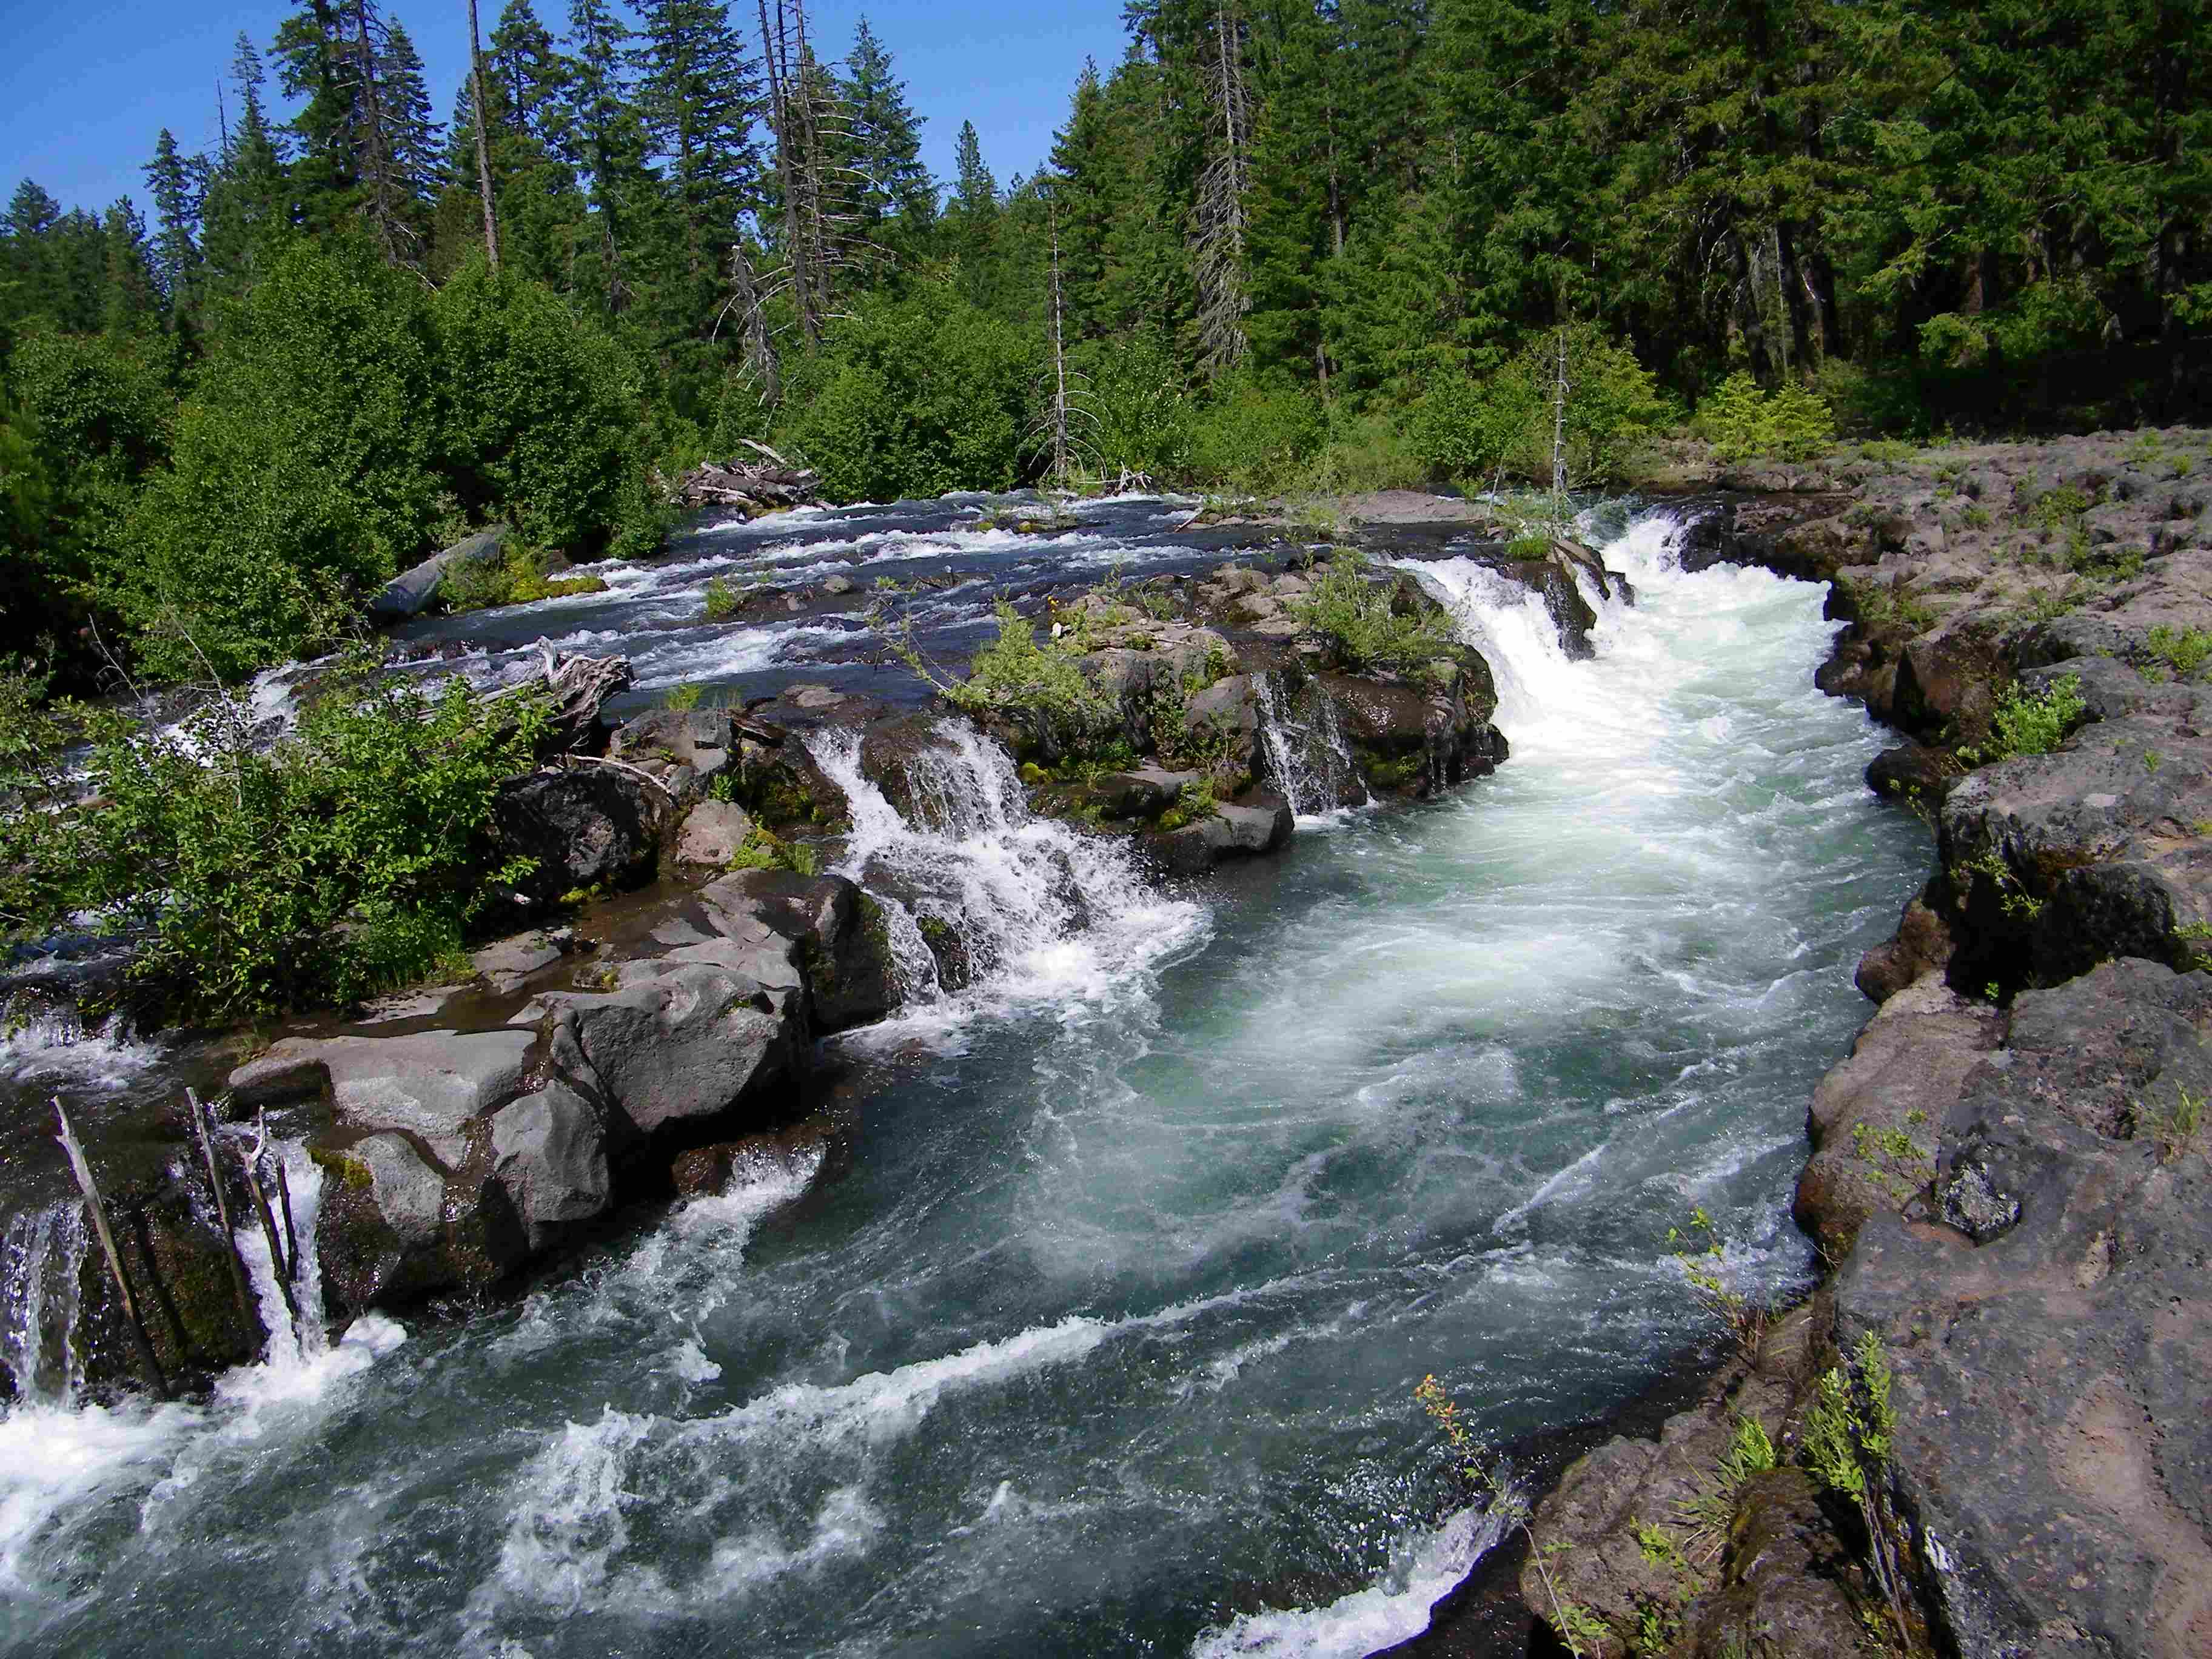 Oregon State Route 62 parallels the Rogue River while still north and 